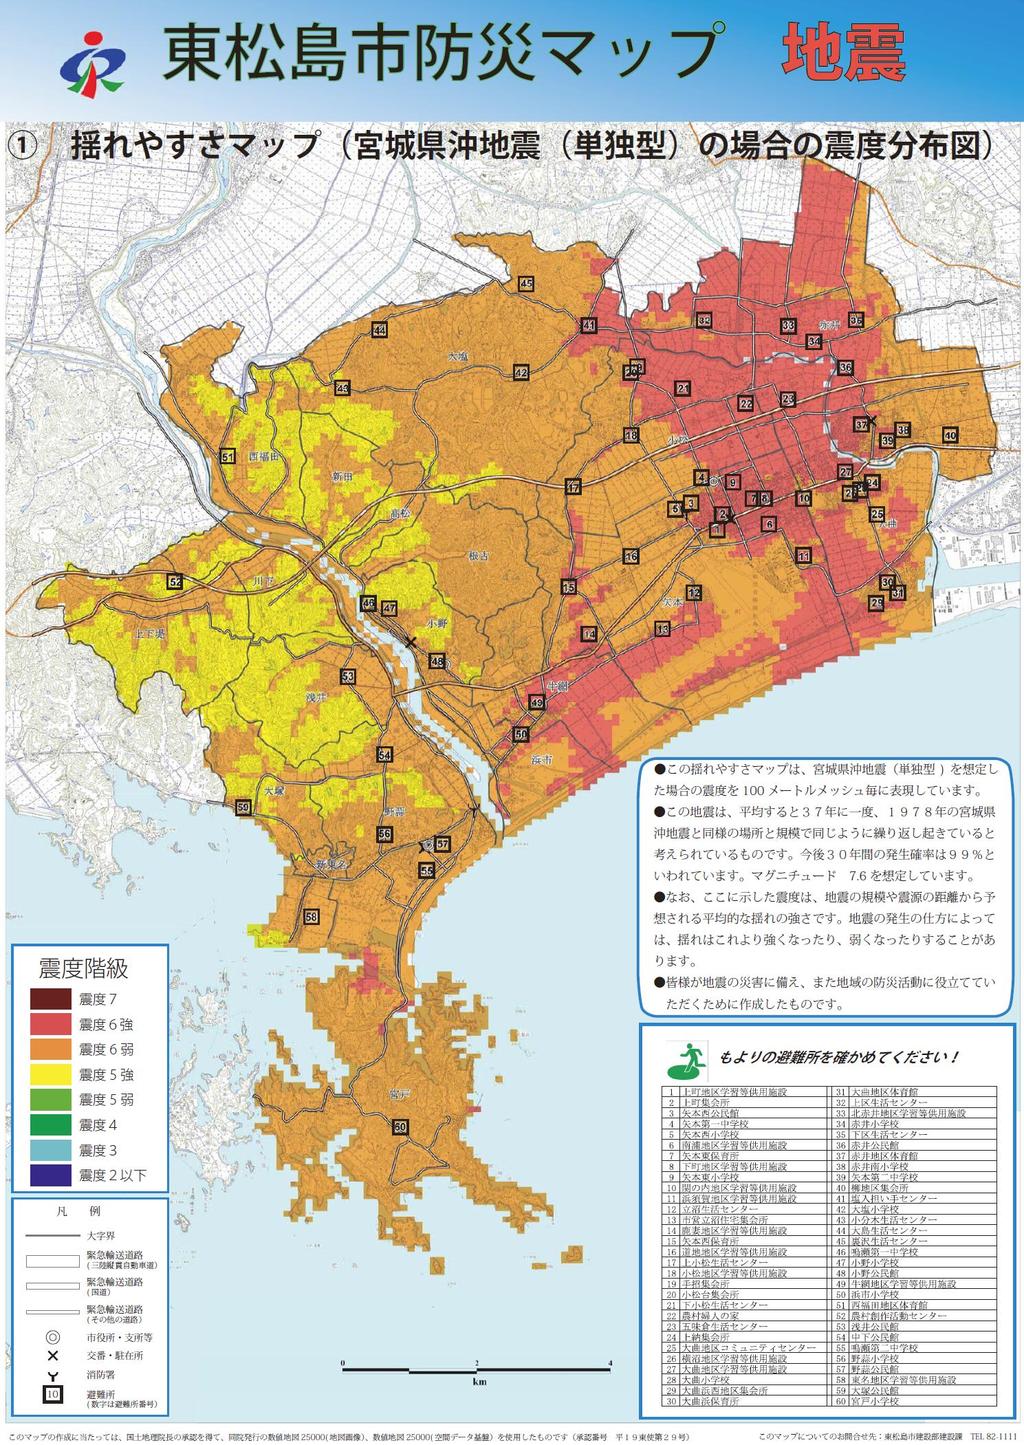 The details and data availability for these hazard maps vary in regions (cities and towns).